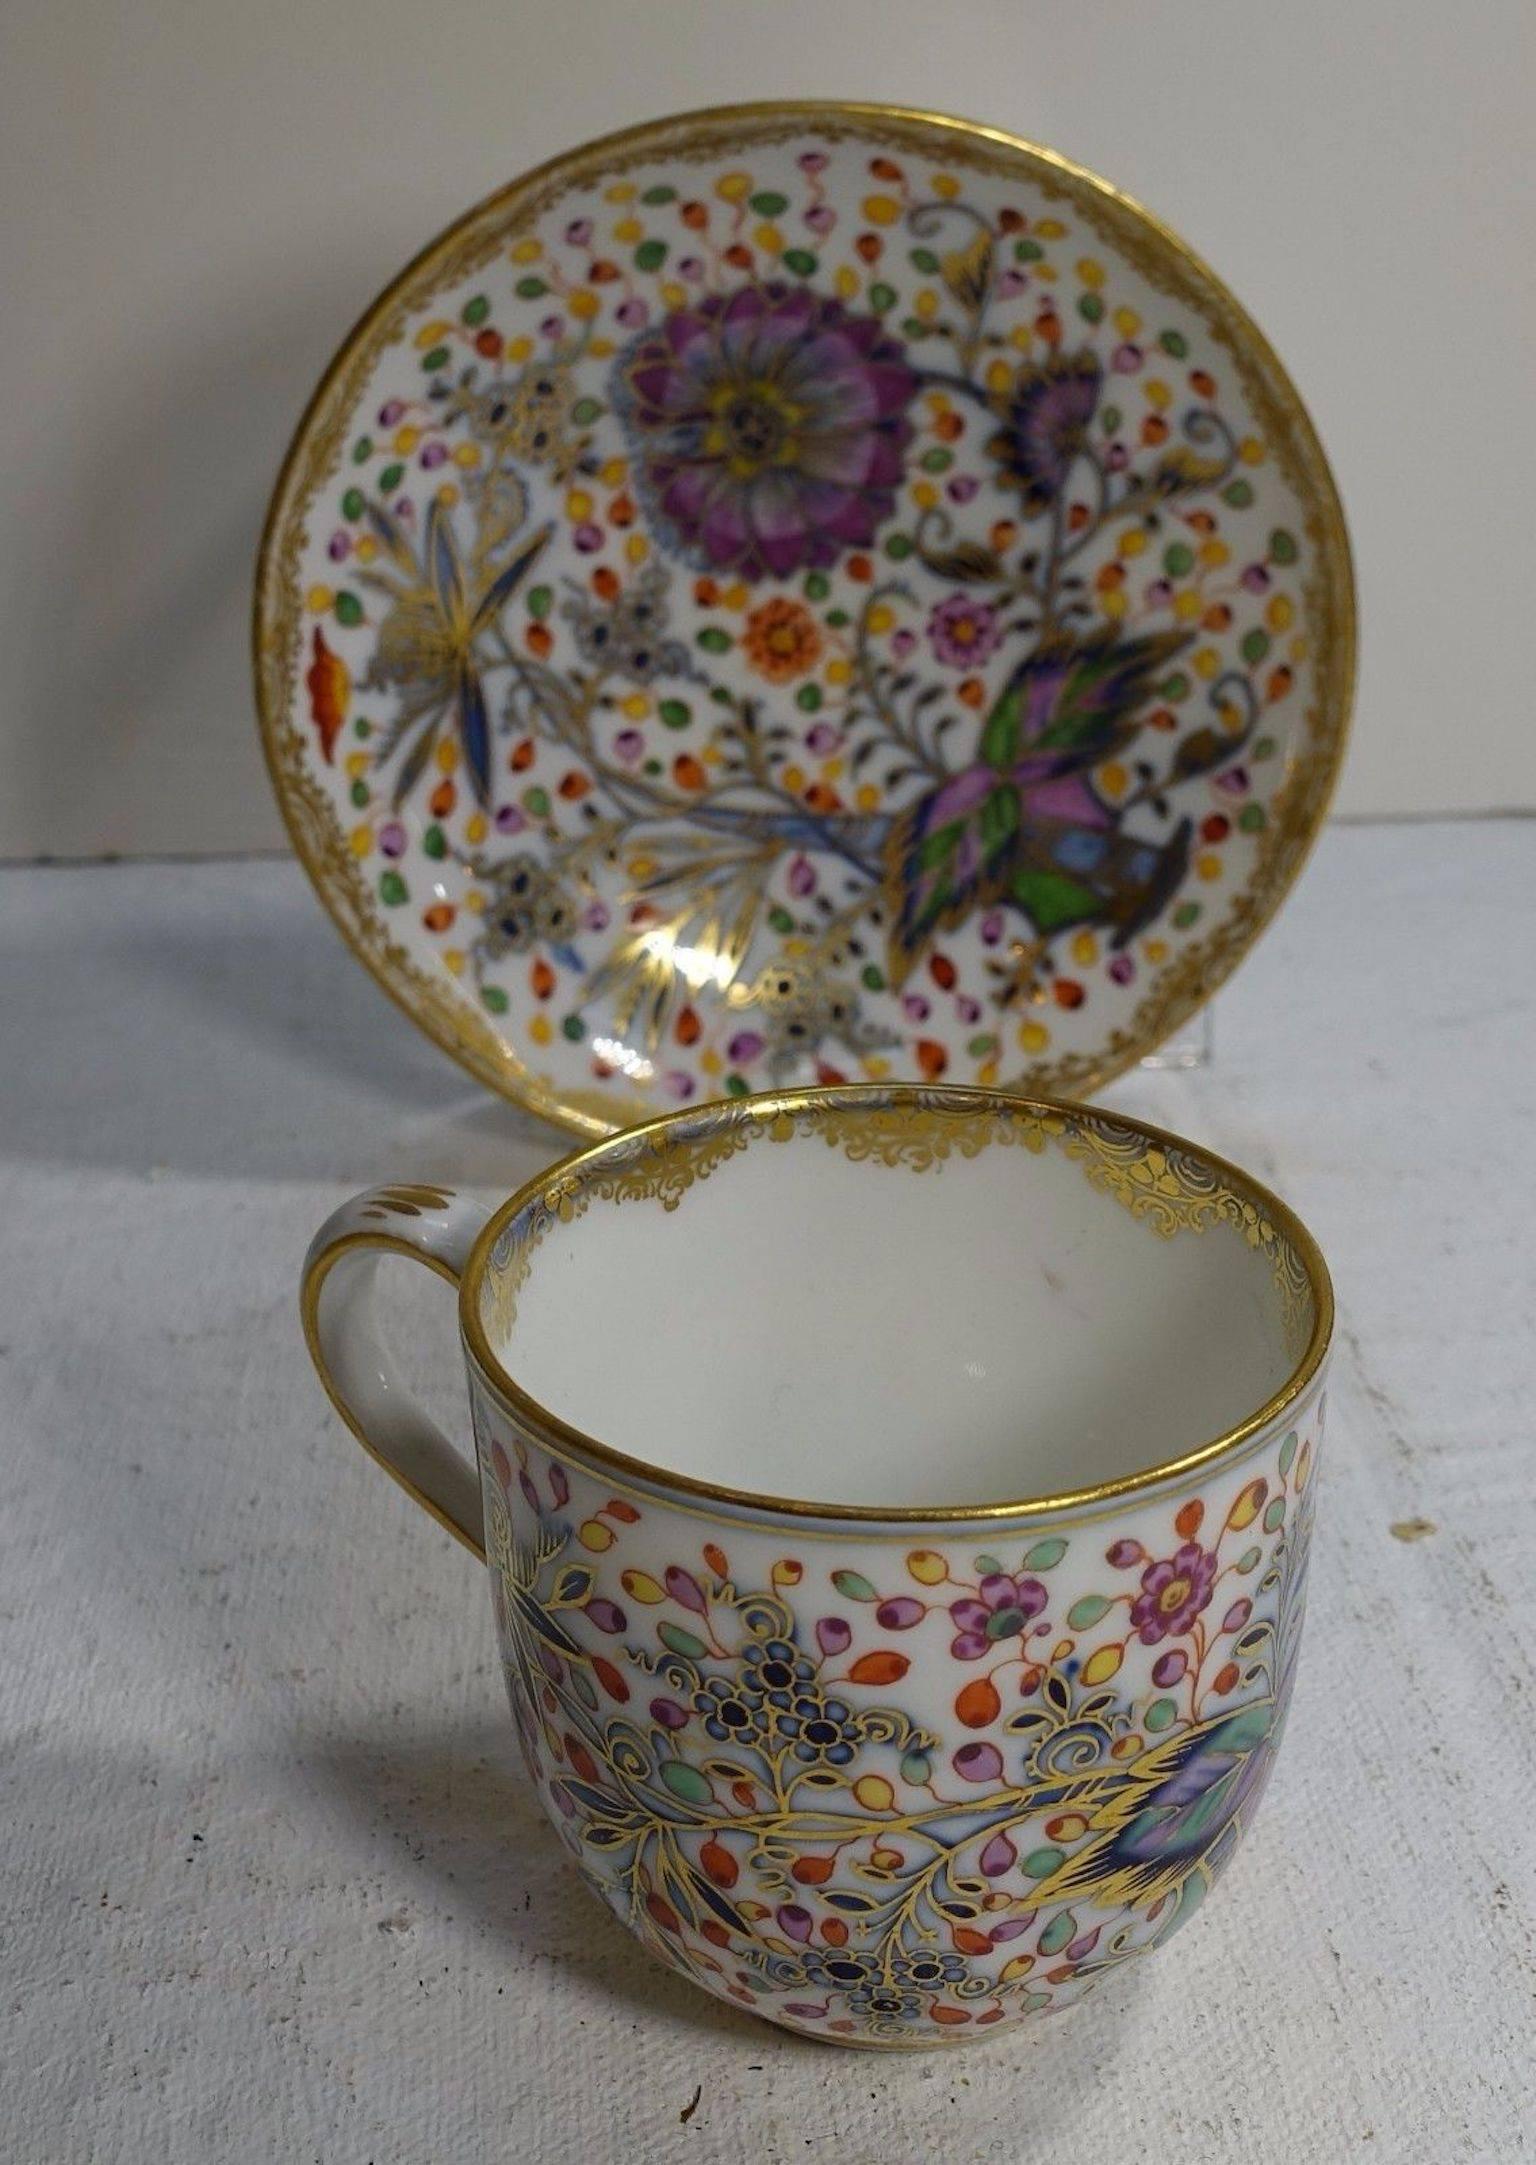 19th Century Meissen Porcelain cup and saucer.
Beautifully hand-painted colorful floral pattern.
Saucer measure: 5 inches diameter.